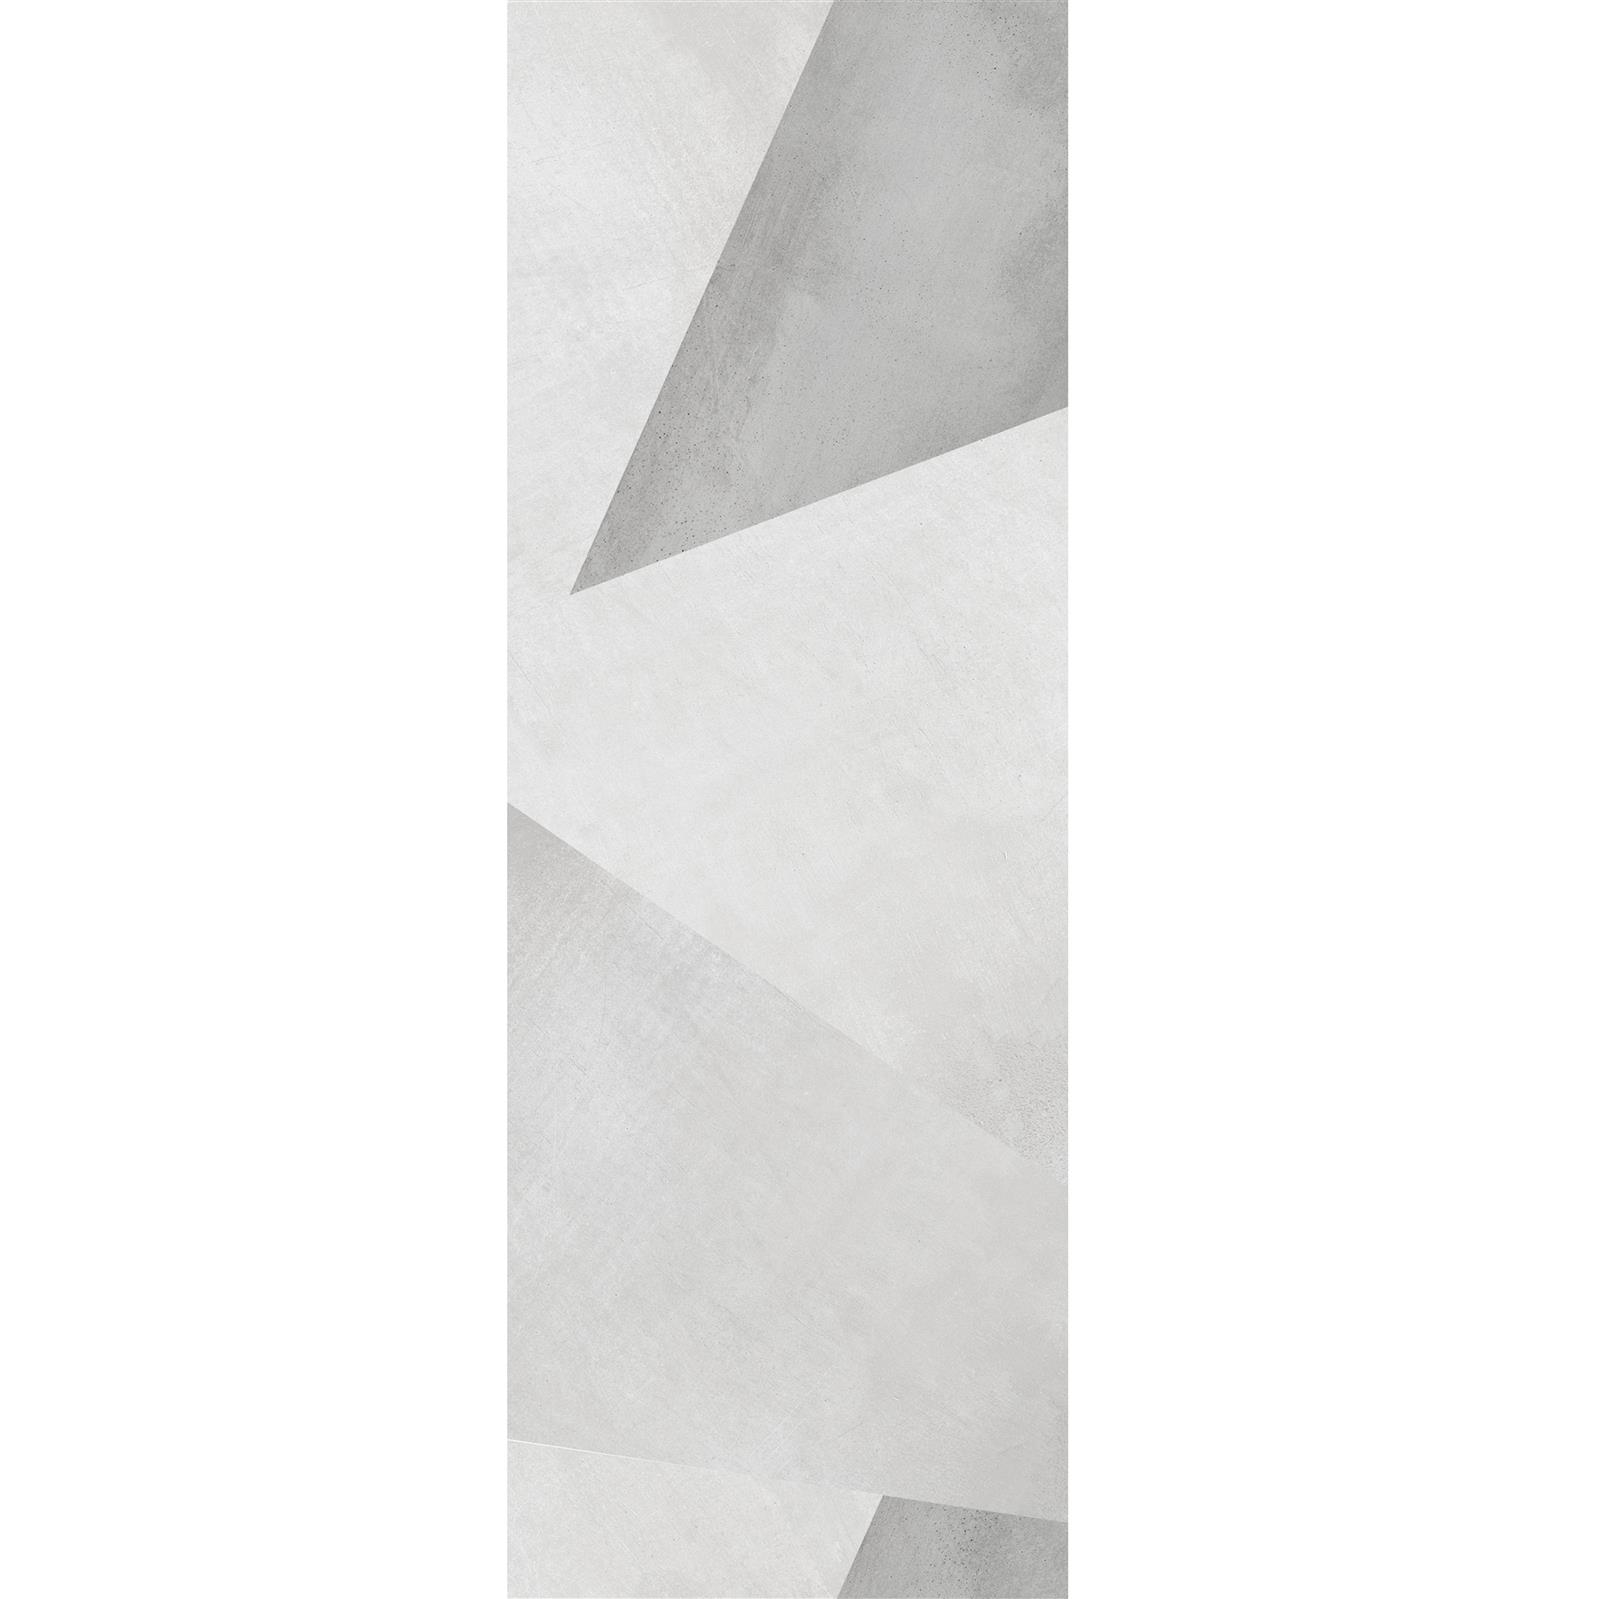 Wall Tiles Queens Rectified White Decor 7 30x90cm